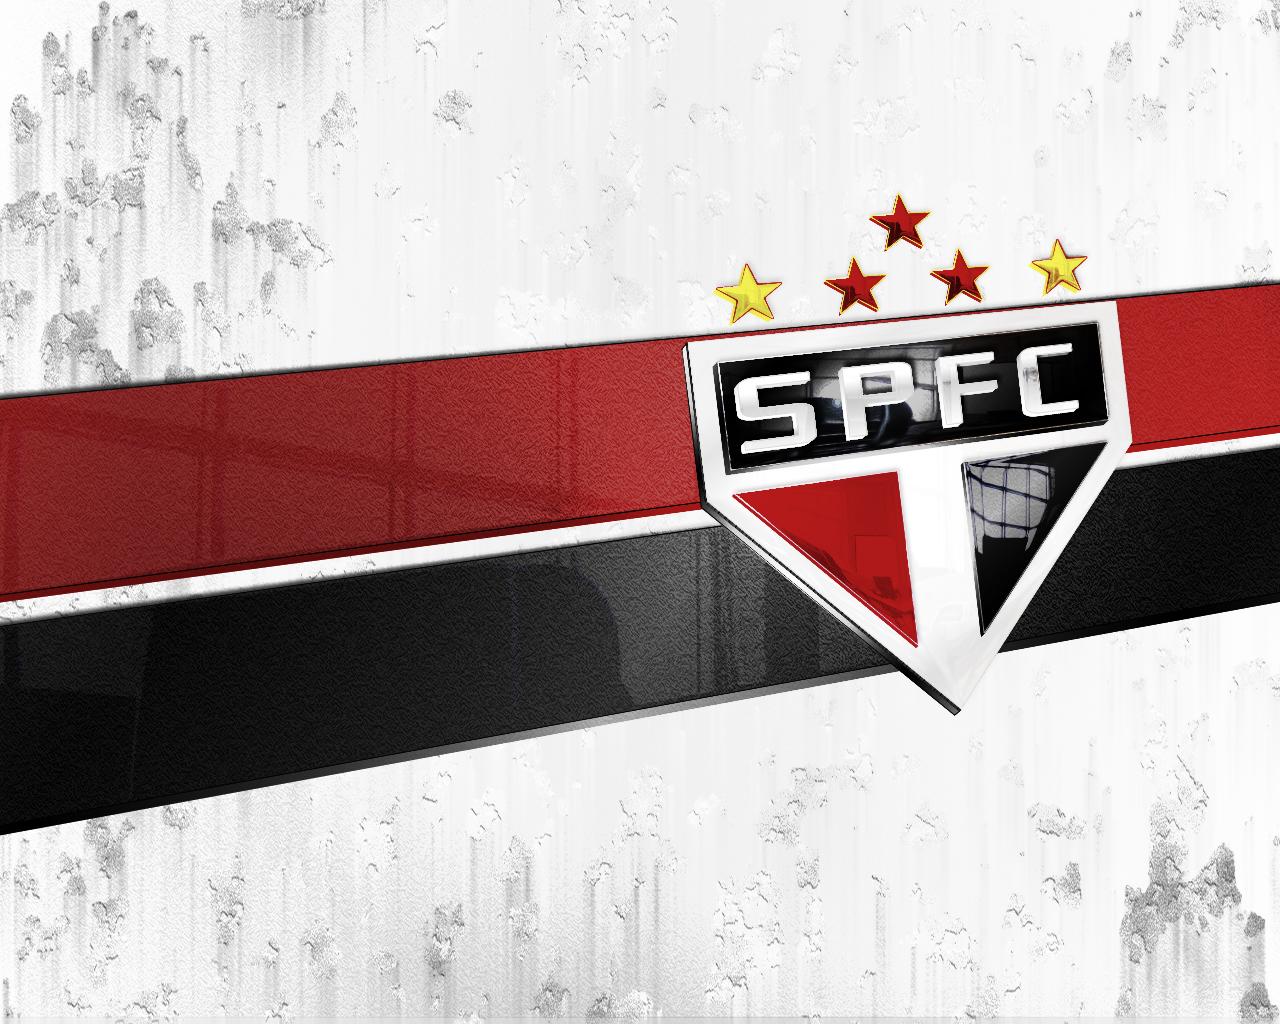 Suo Paulo Fc Wallpapers